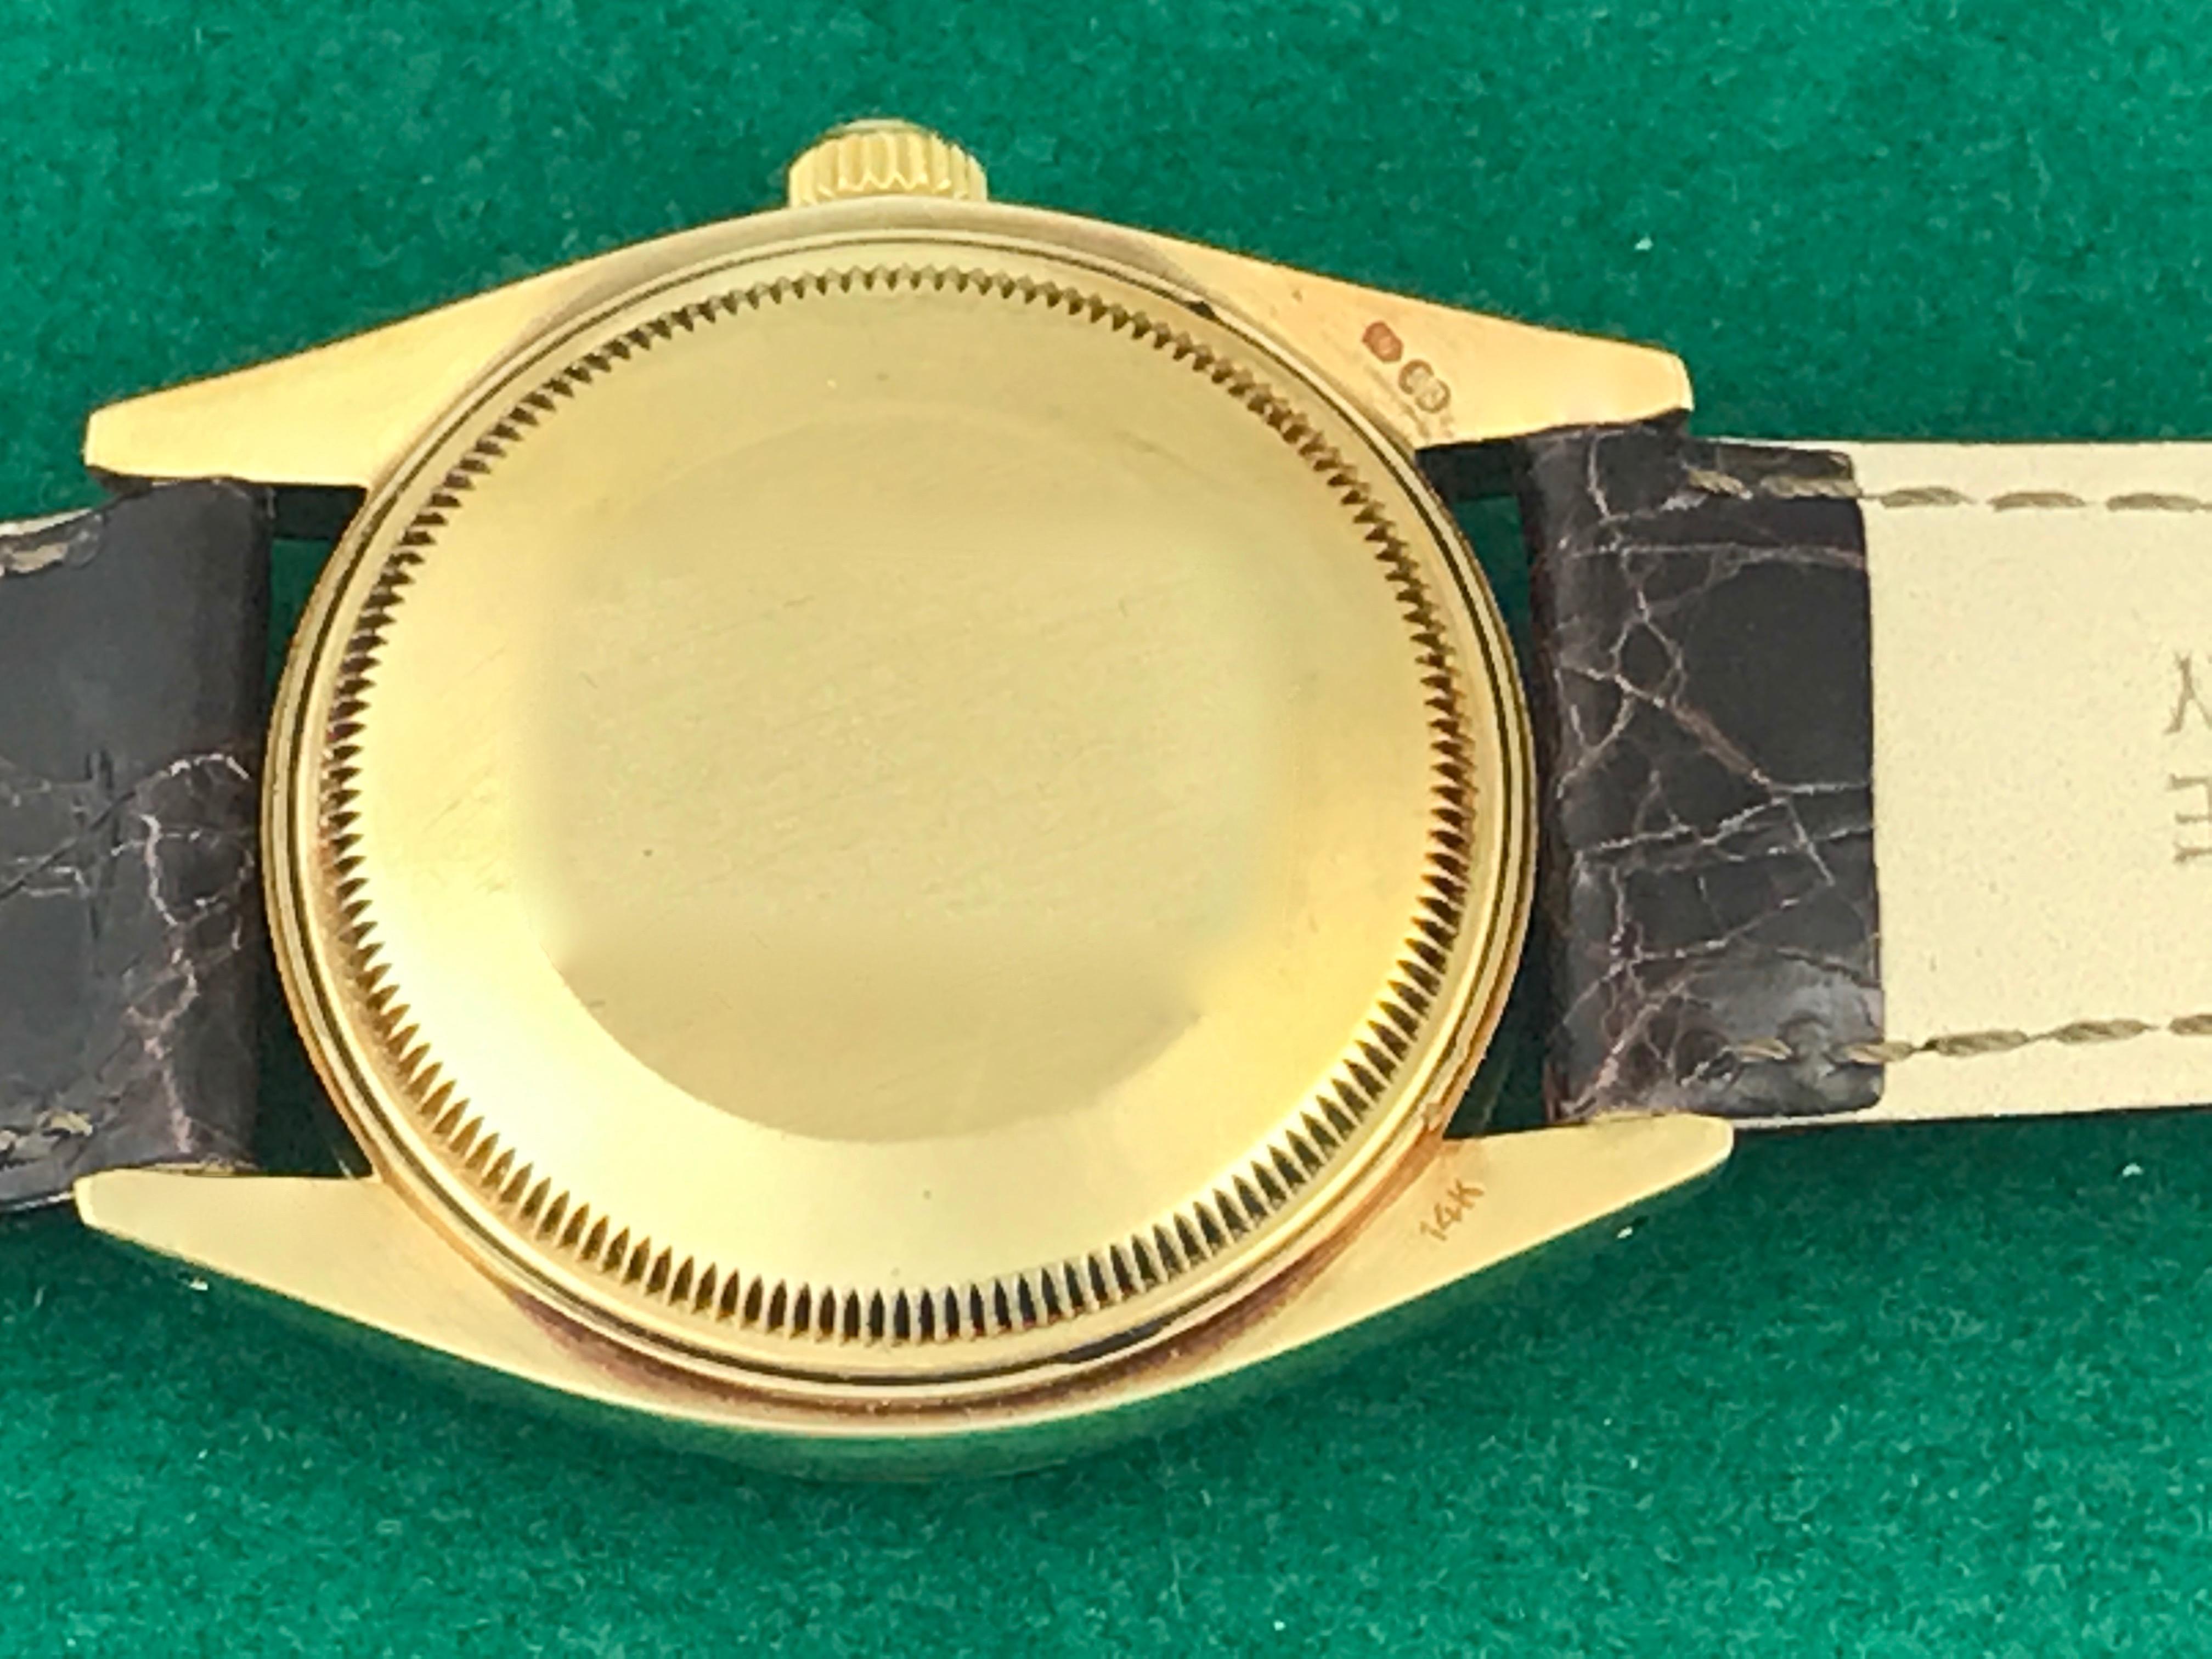 Rolex Yellow Gold Date Automatic Wristwatch Ref 1503 For Sale 1